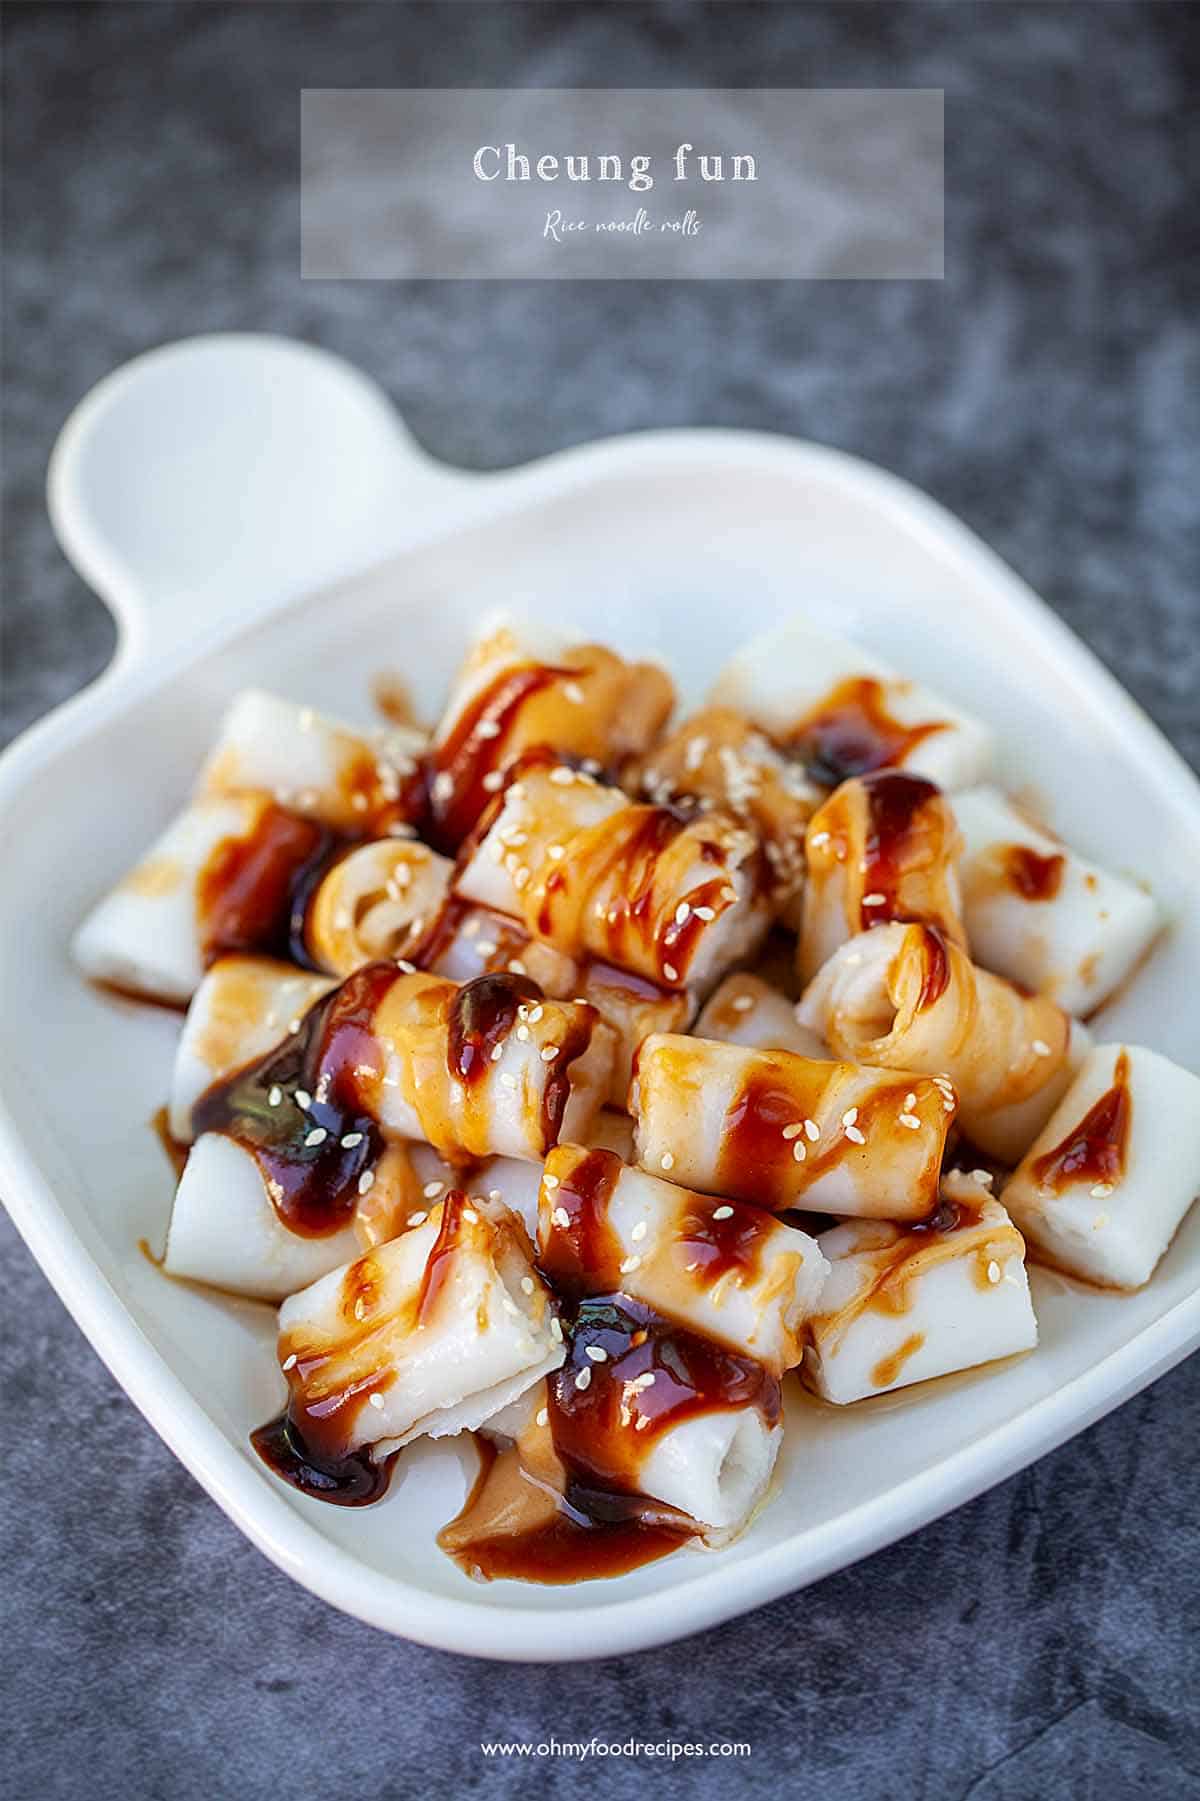 Rice noodle rolls with sauce on a white plate.